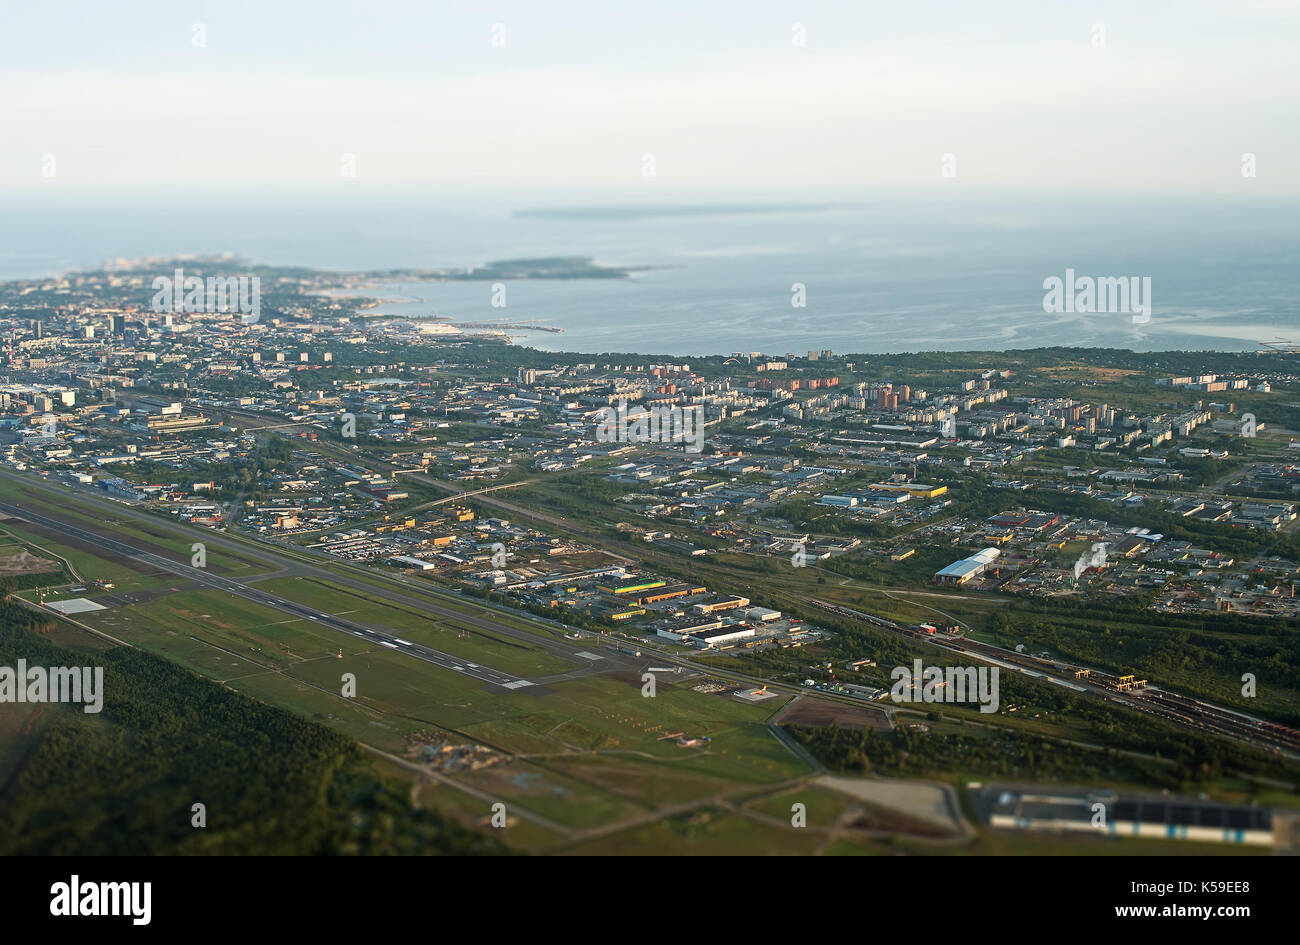 View from the plane to Tallinn airport and Lasnamae district. Stock Photo